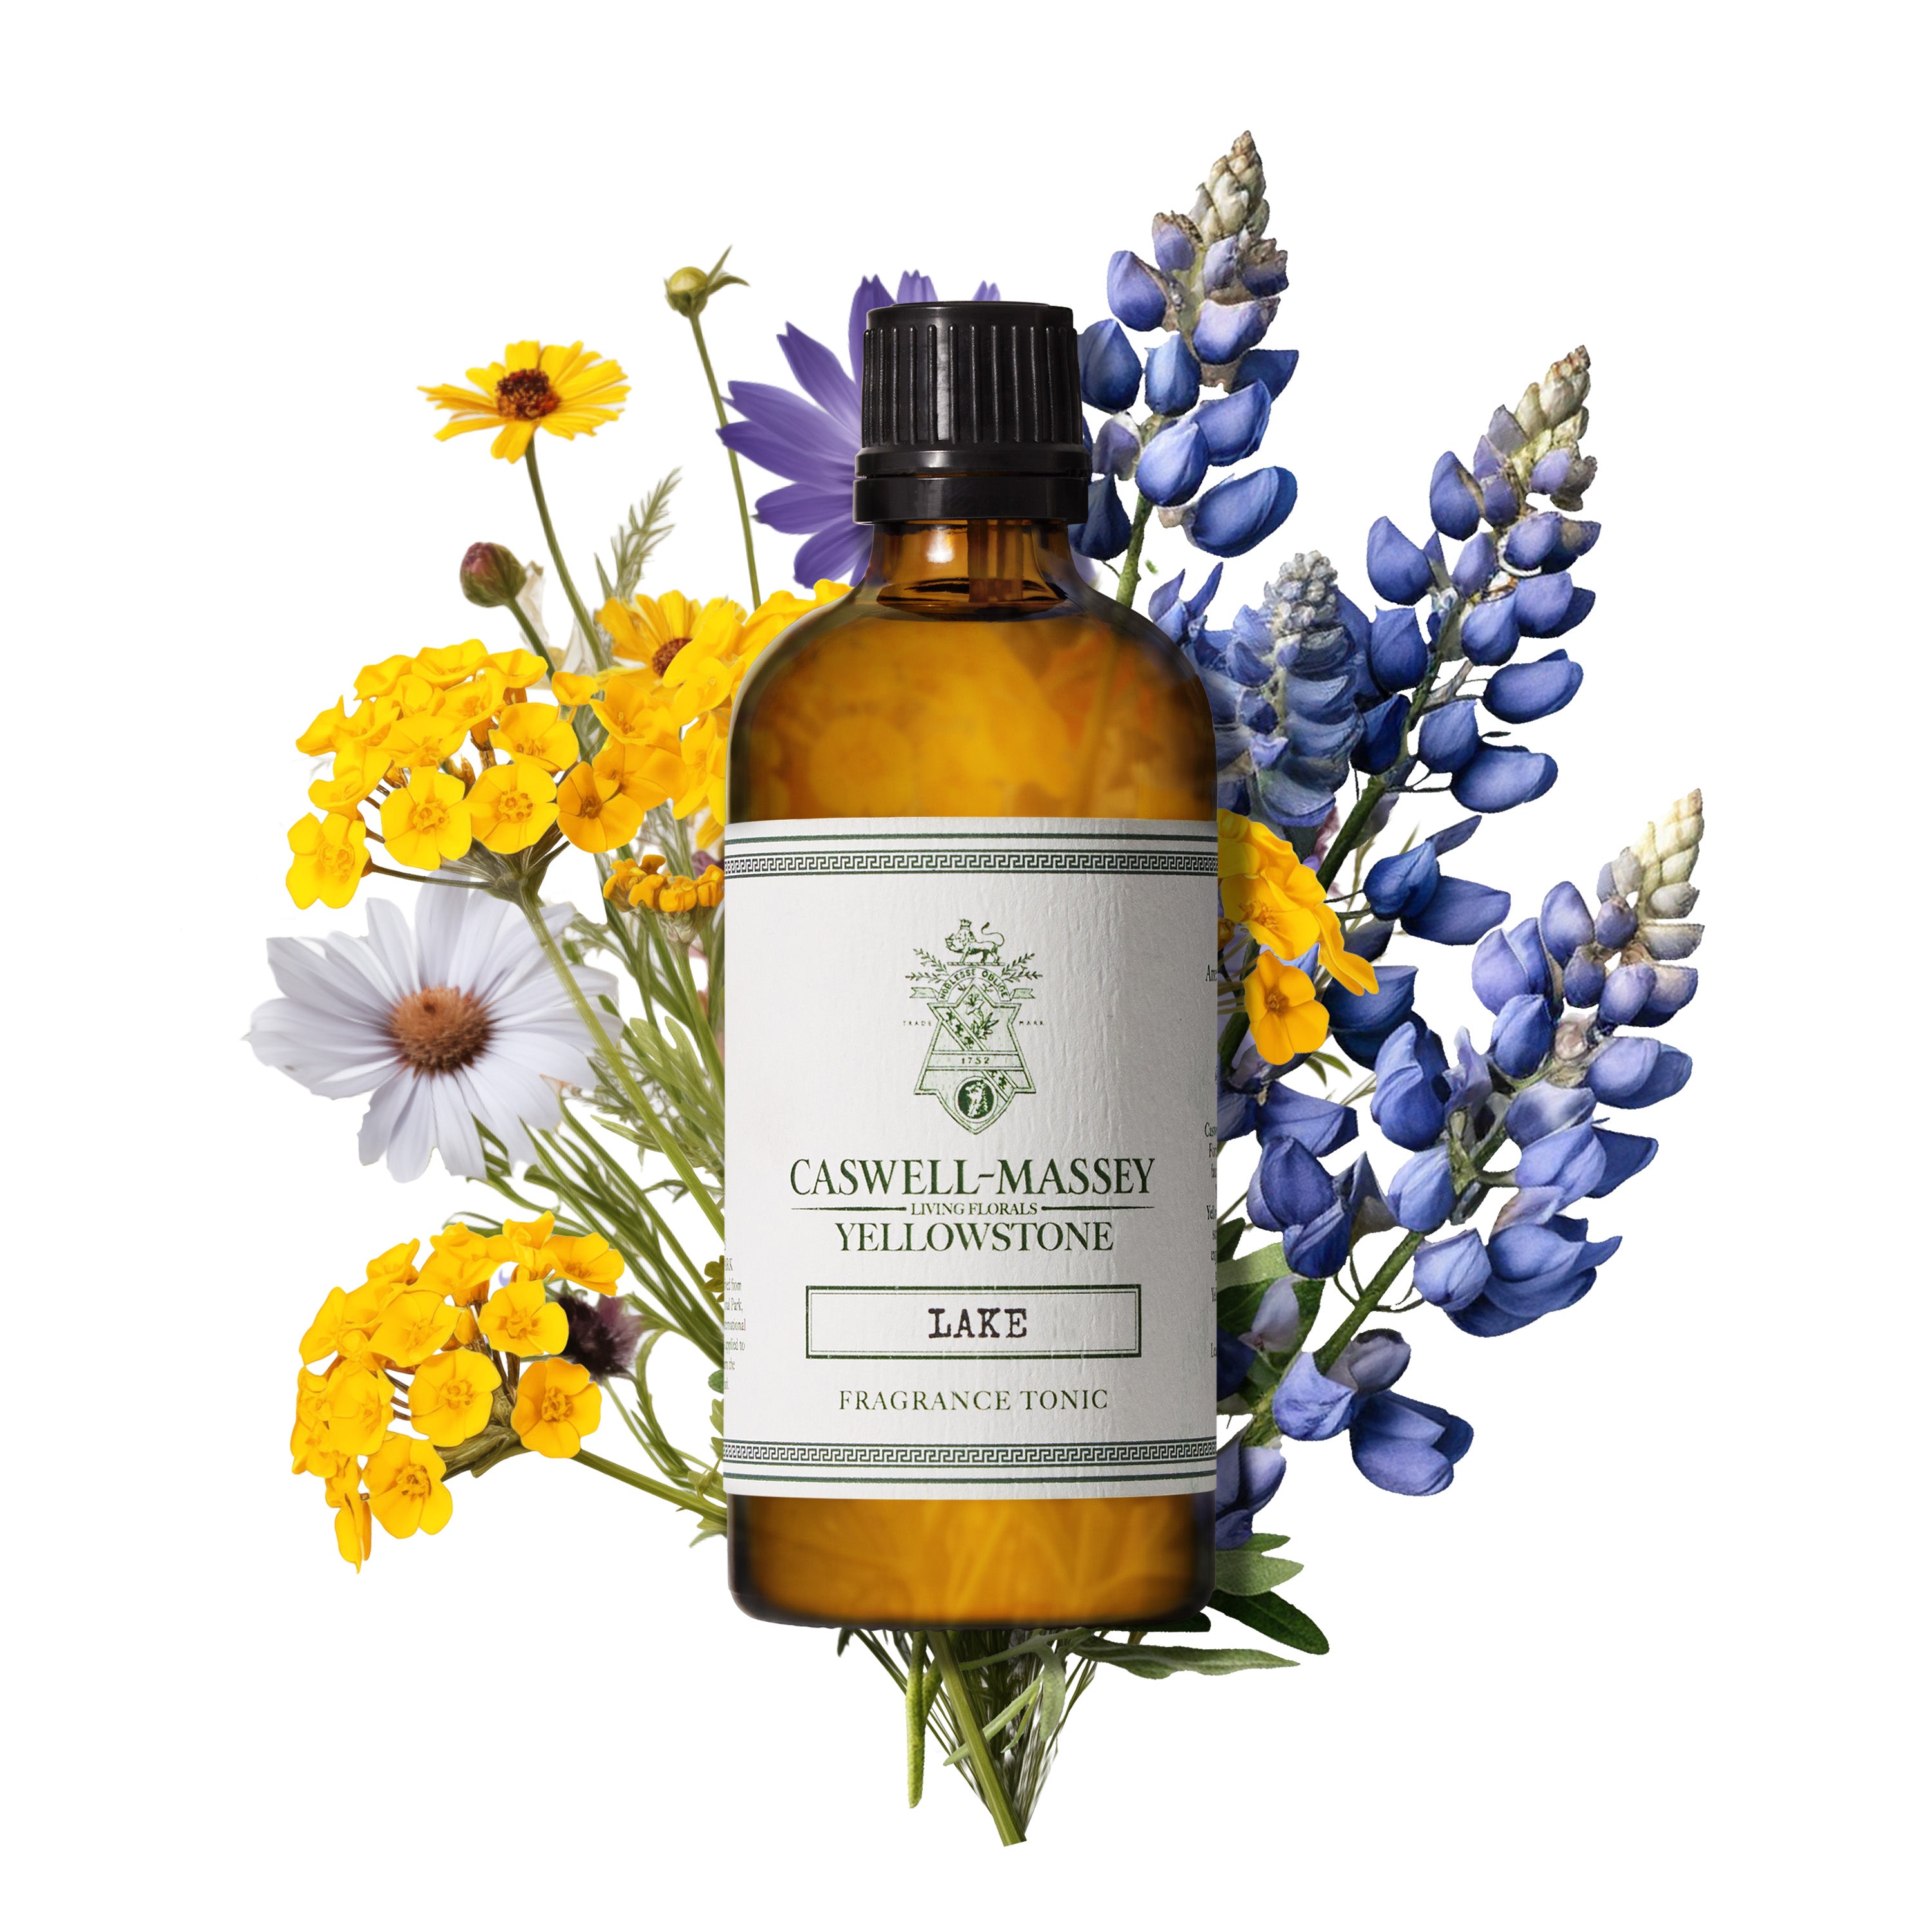 Yellowstone Lake Tonic bottle over a bouquet of florals inspired to create the scent